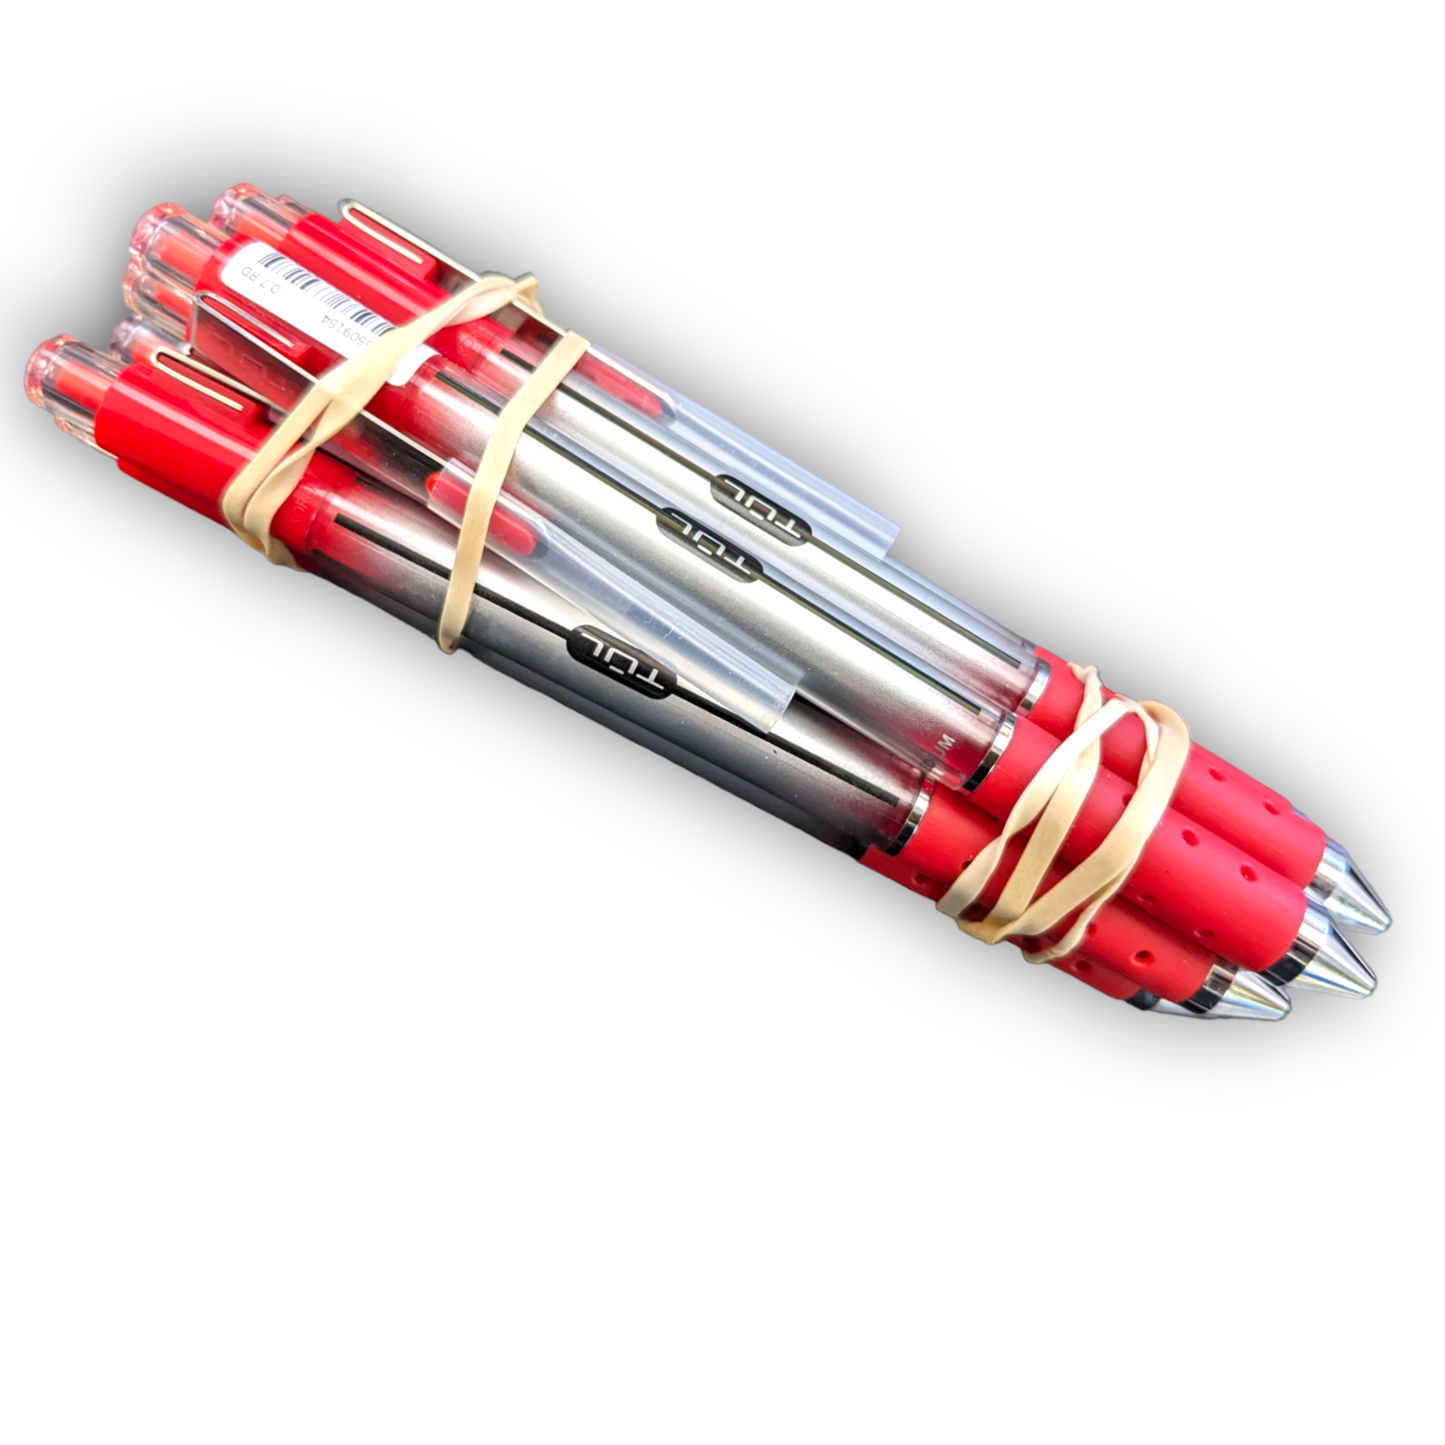 8x Lot of TUL Retractable-Med Point, 0.7-RED pen-NEW